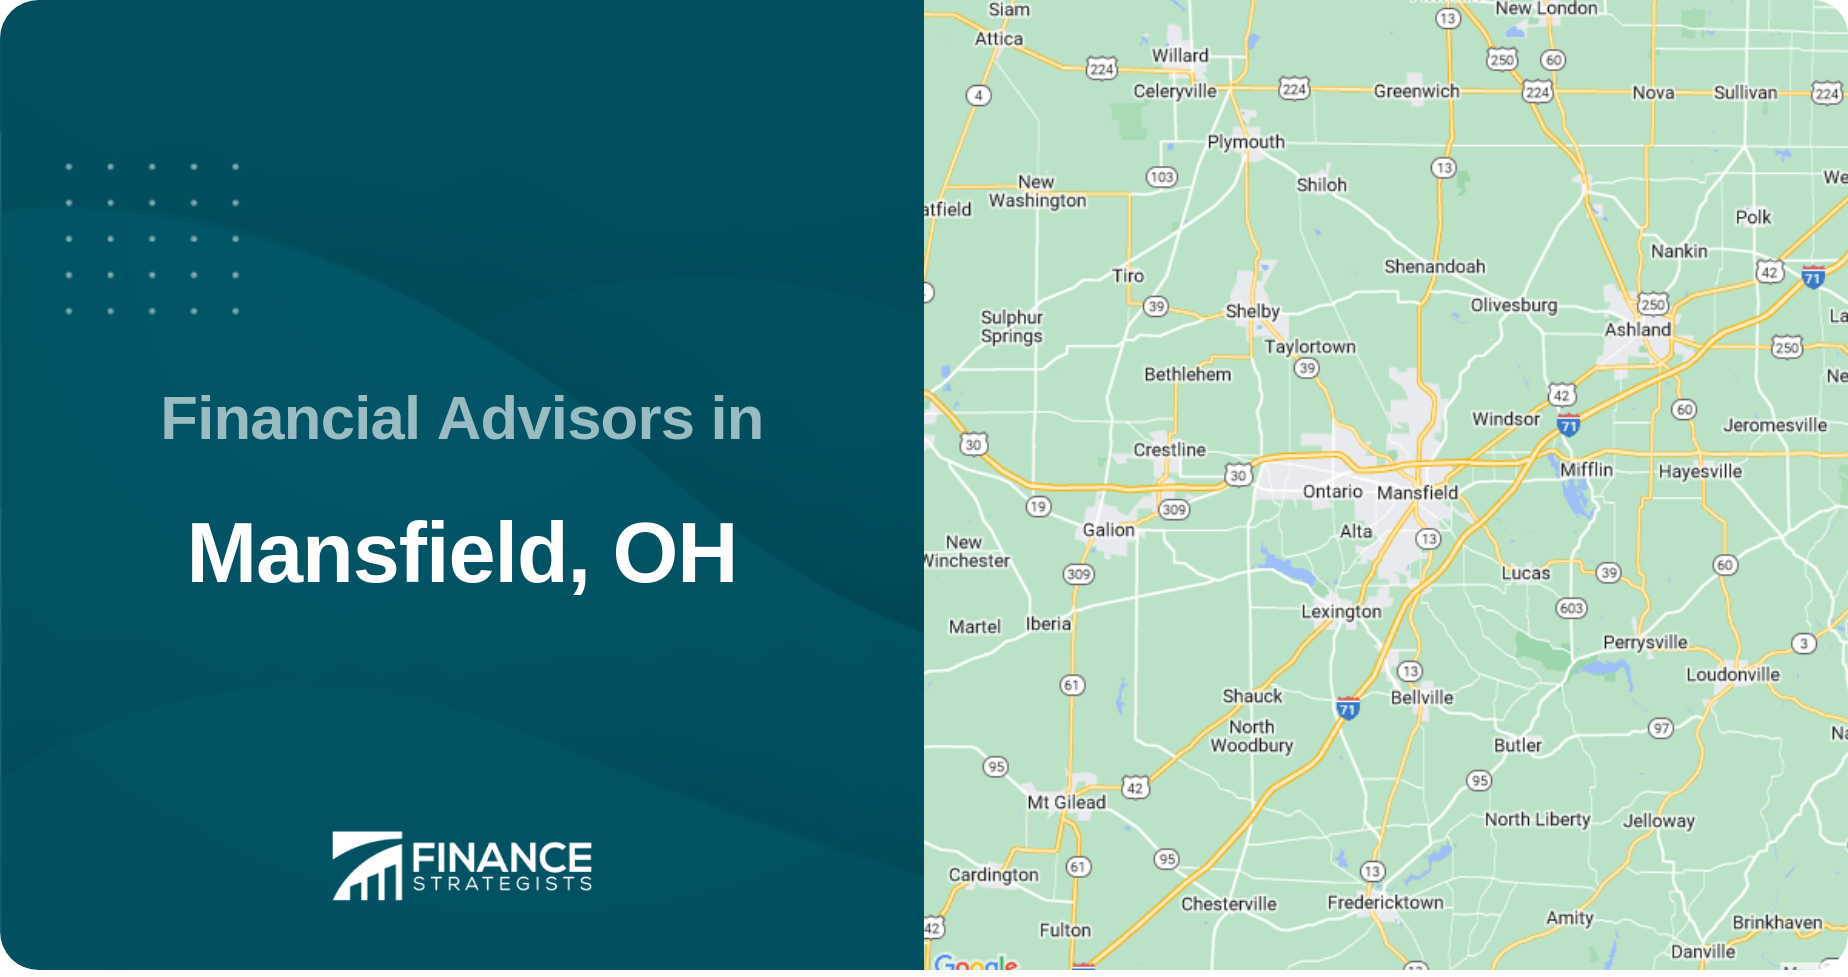 Financial Advisors in Mansfield, OH